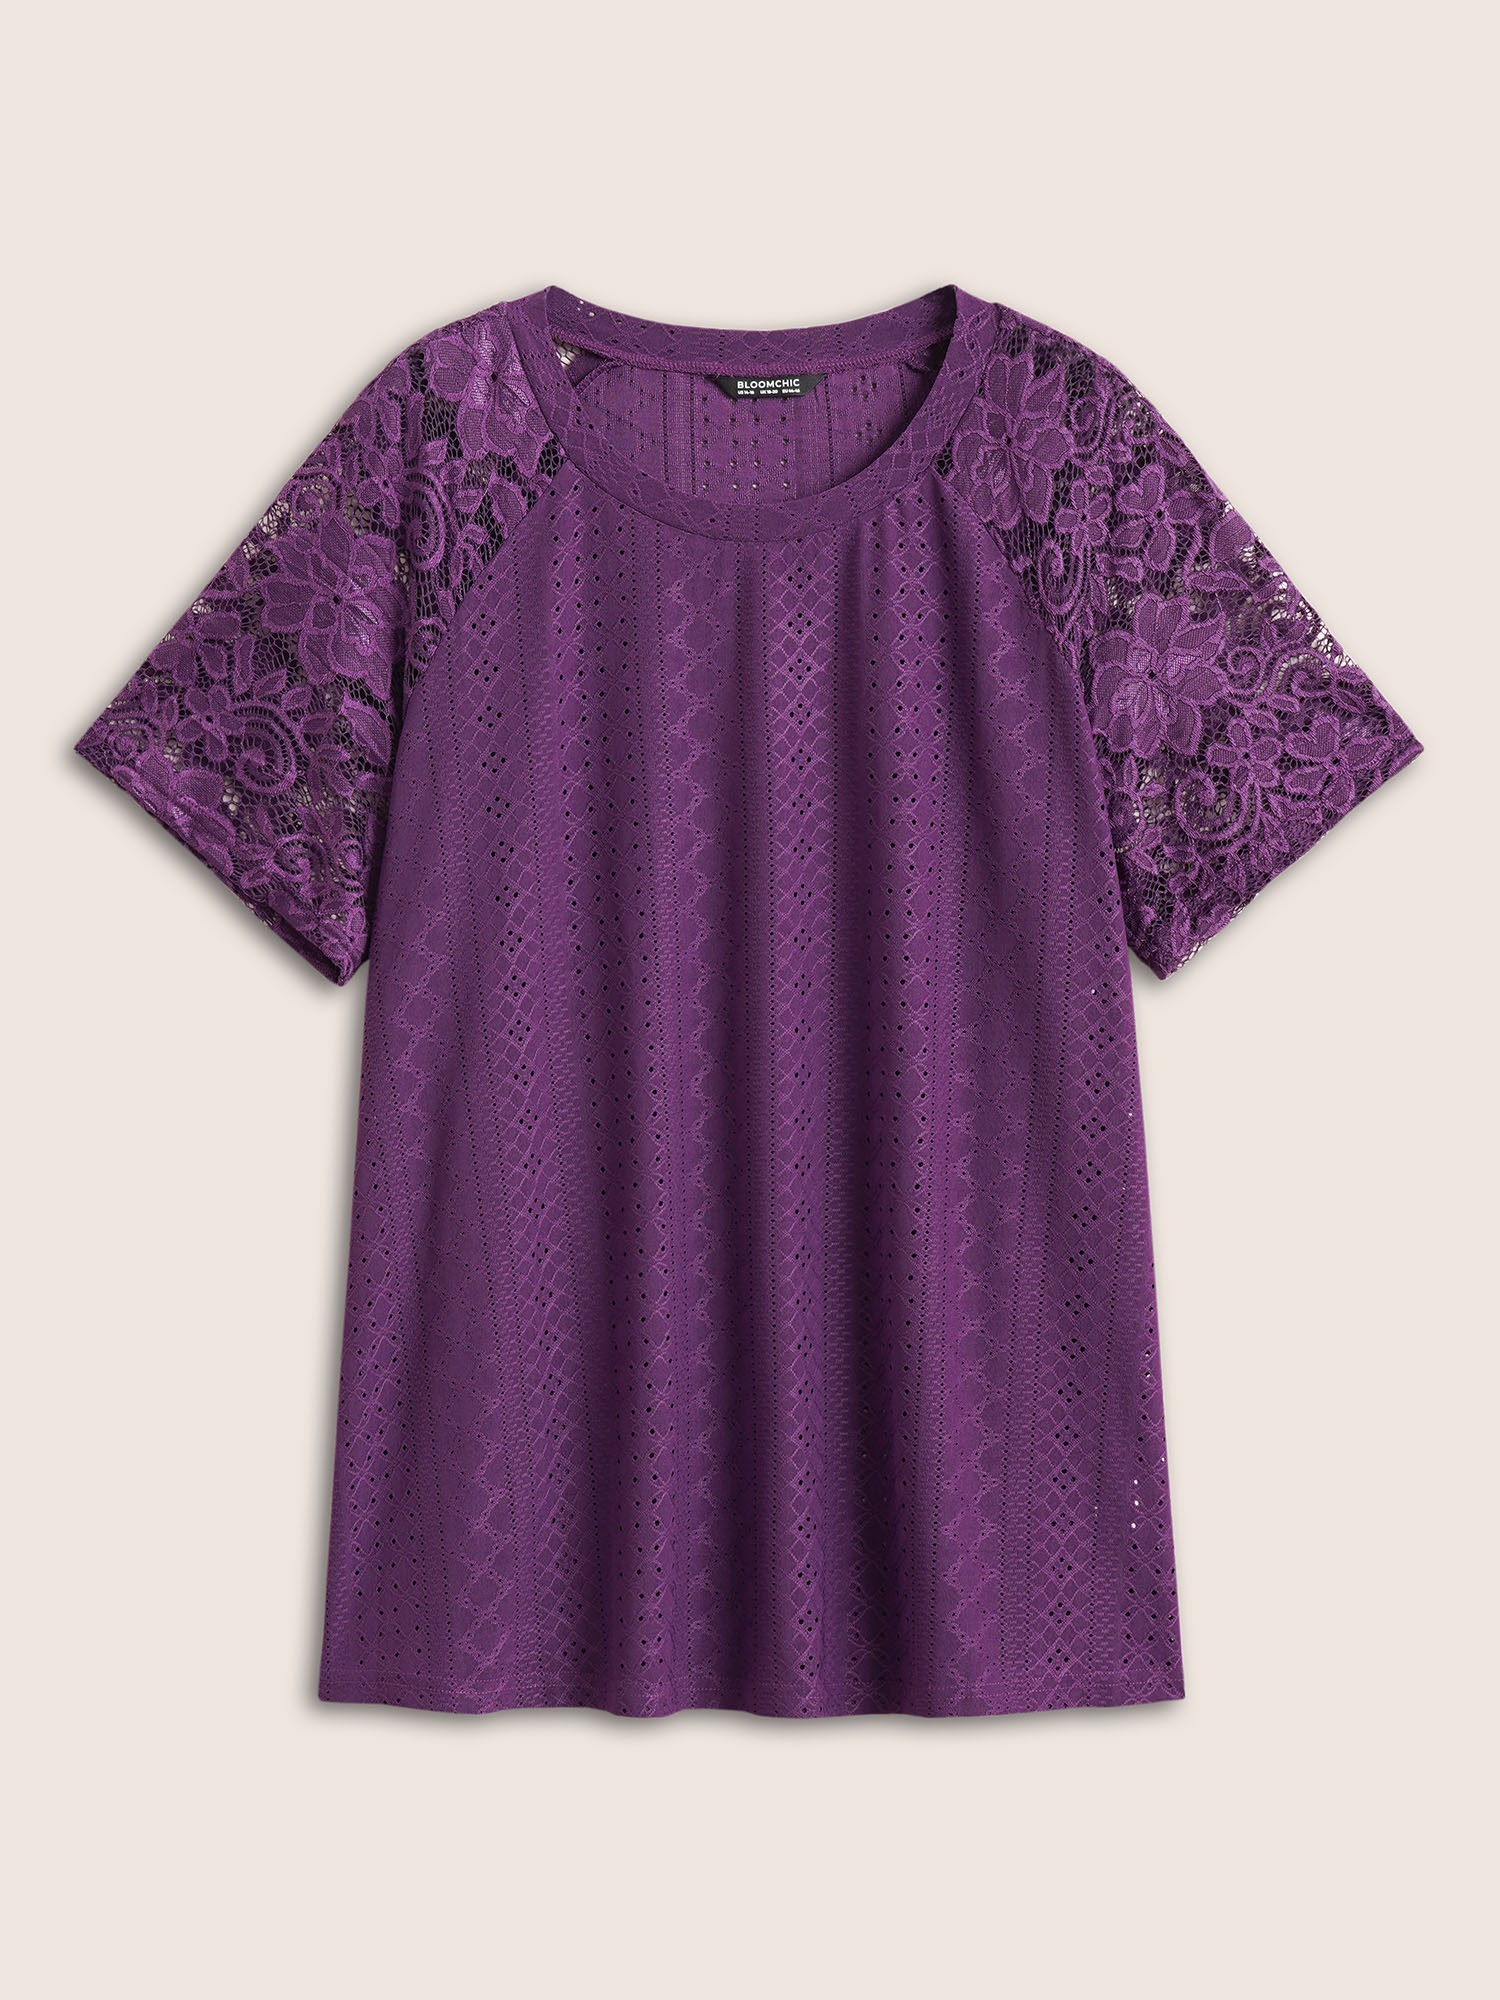 

Plus Size Solid Broderie Anglaise Lace Raglan Sleeve T-shirt Purple Women Elegant See through Plain Round Neck Everyday T-shirts BloomChic